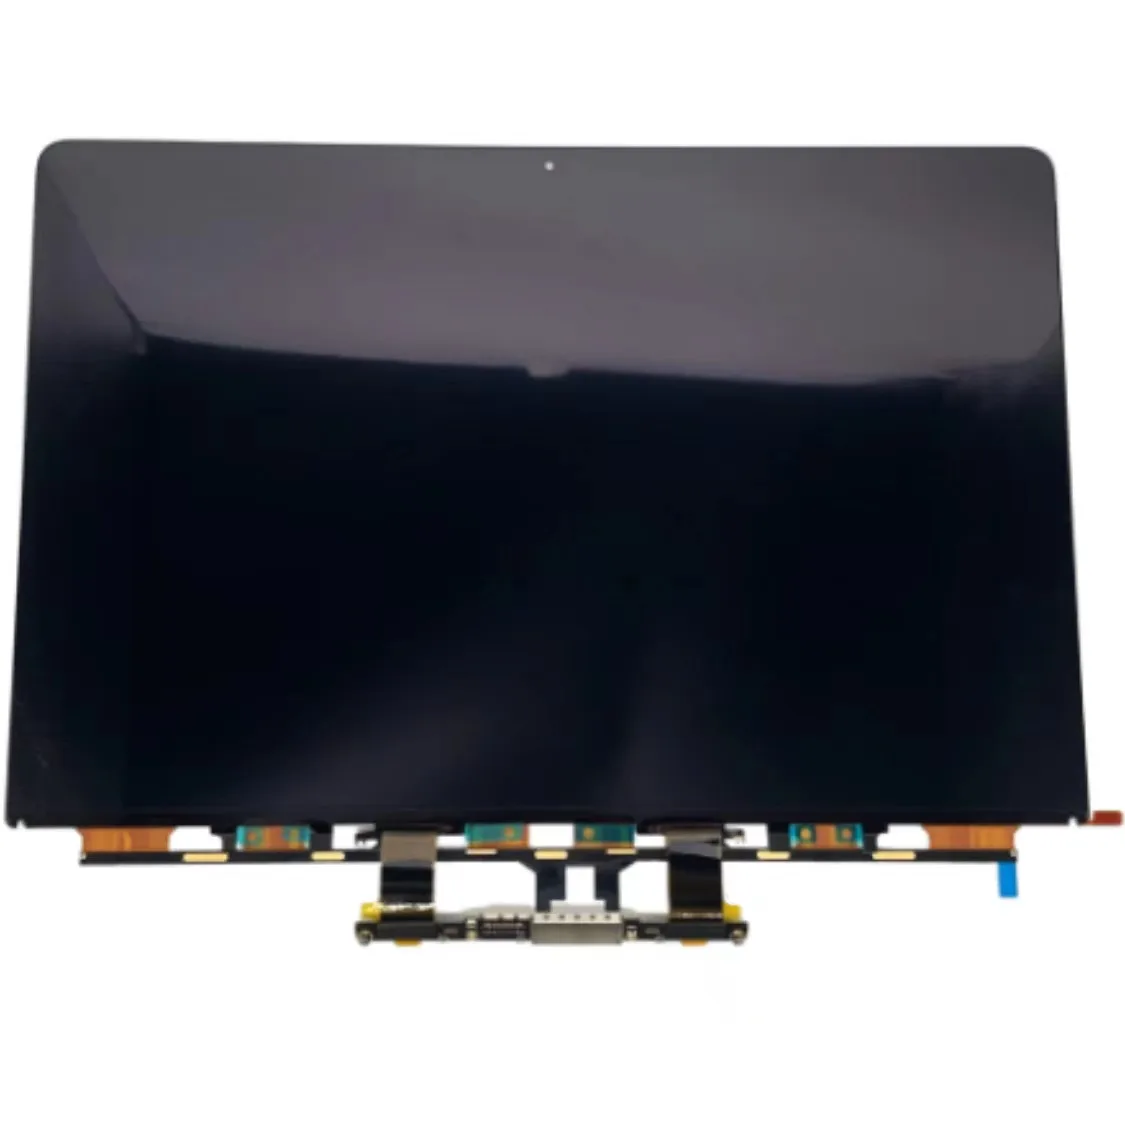 

New New Late 2018 Year A1932 LCD LED Screen Glass for Macbook Air Retina 13.3" A1932 LCD Display Screen Panel EMC3184 MRE82